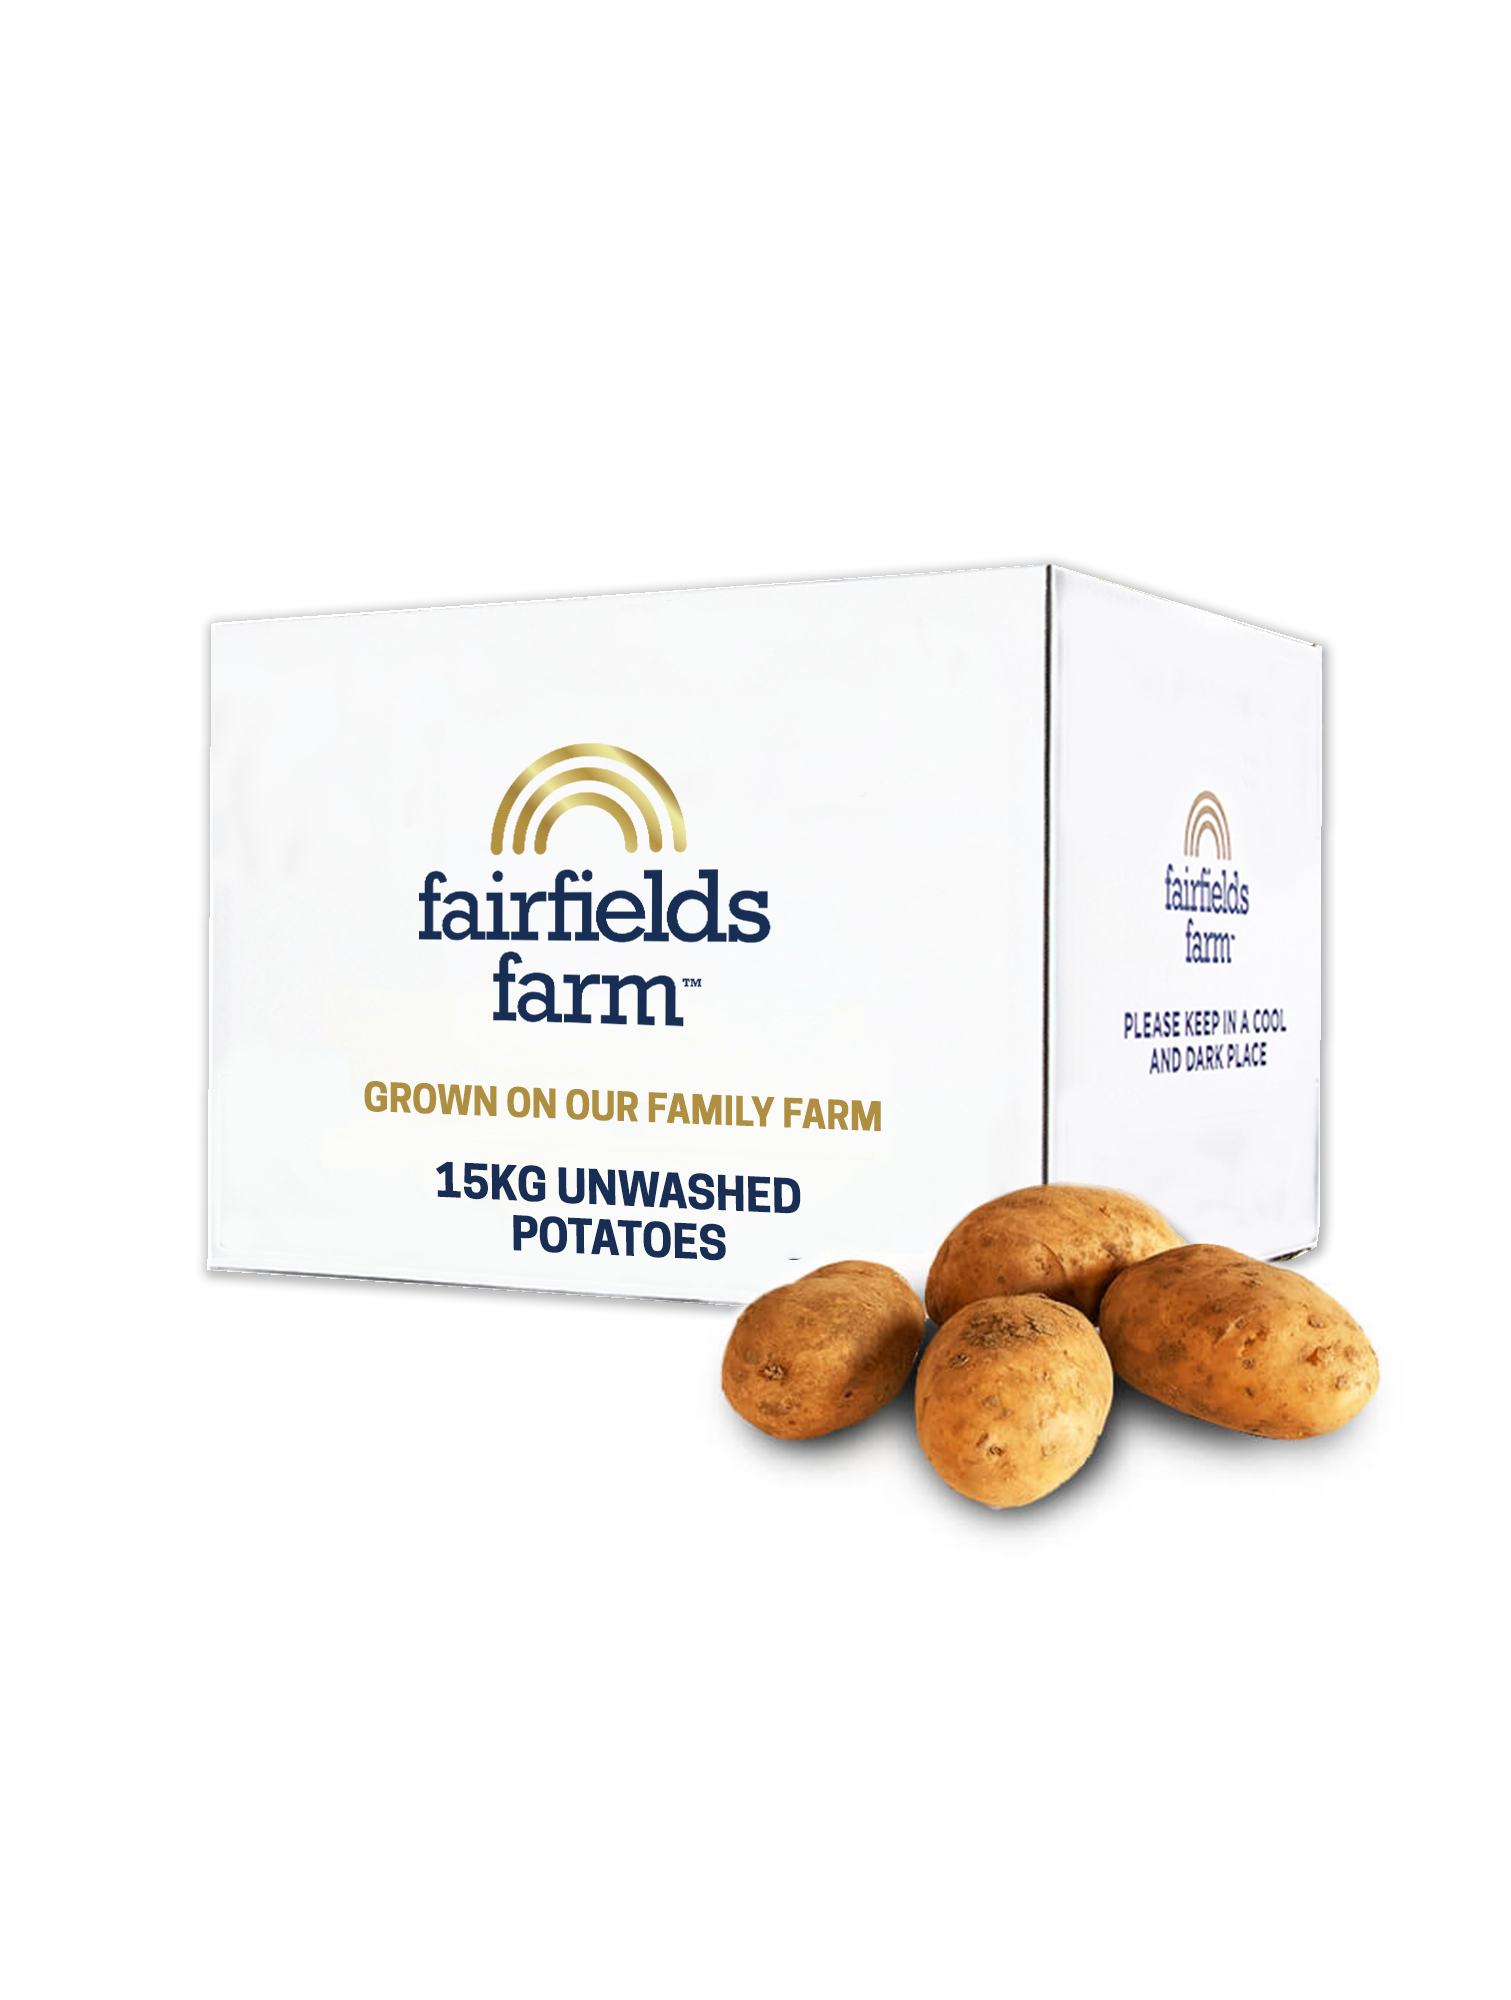 15kg Of Unwashed Potatoes for Roasting/Chipping – Various Sizes